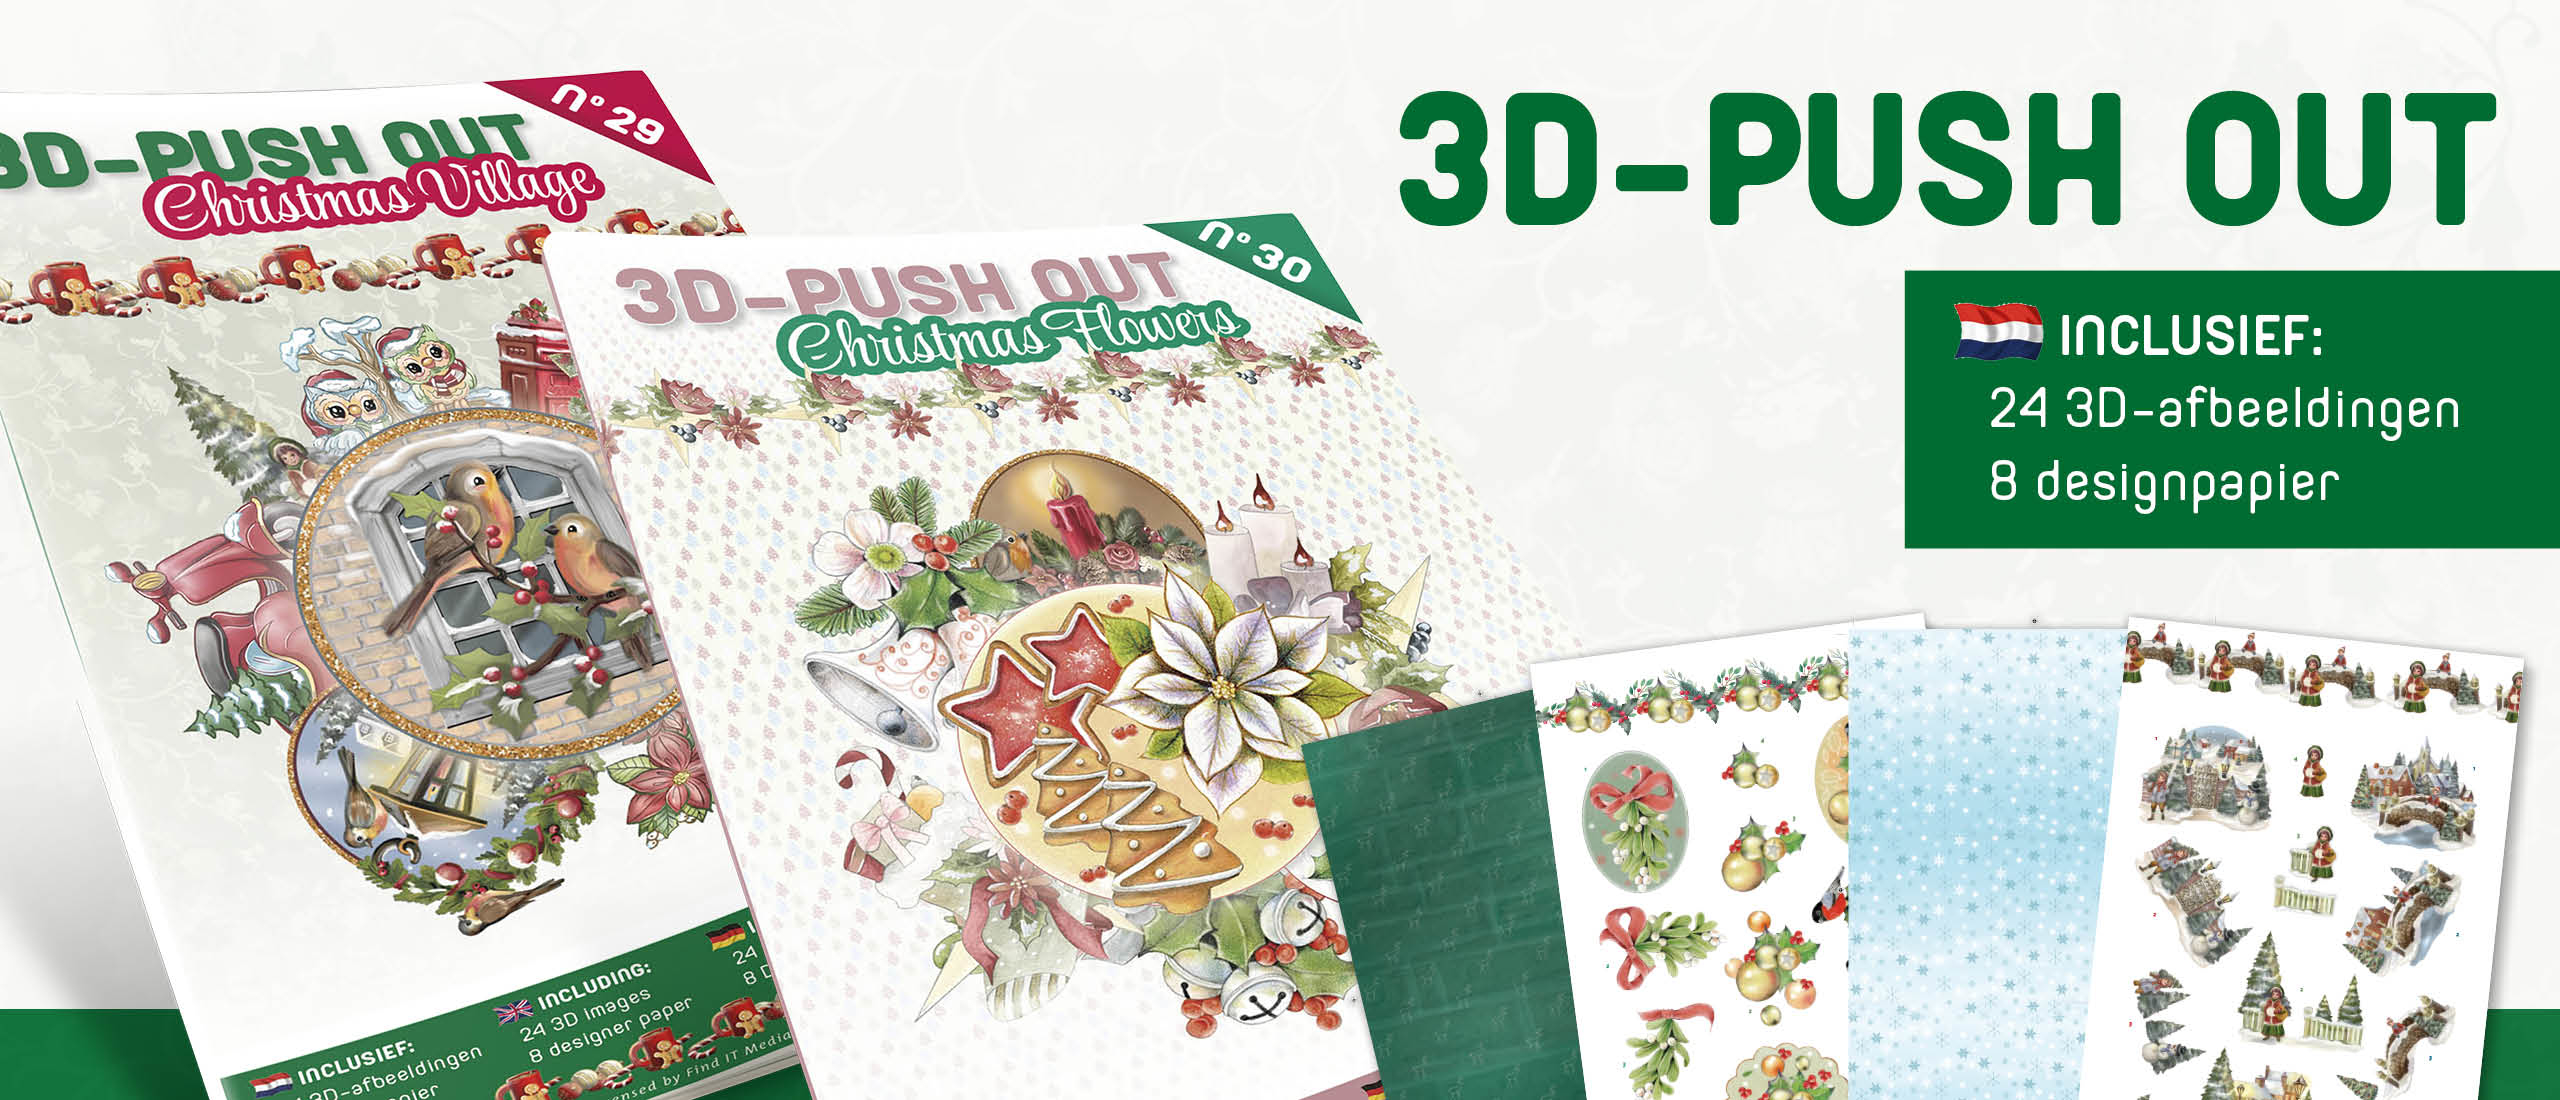 3D Push Out book 29-30 Christmas Village and Christmas Flowers